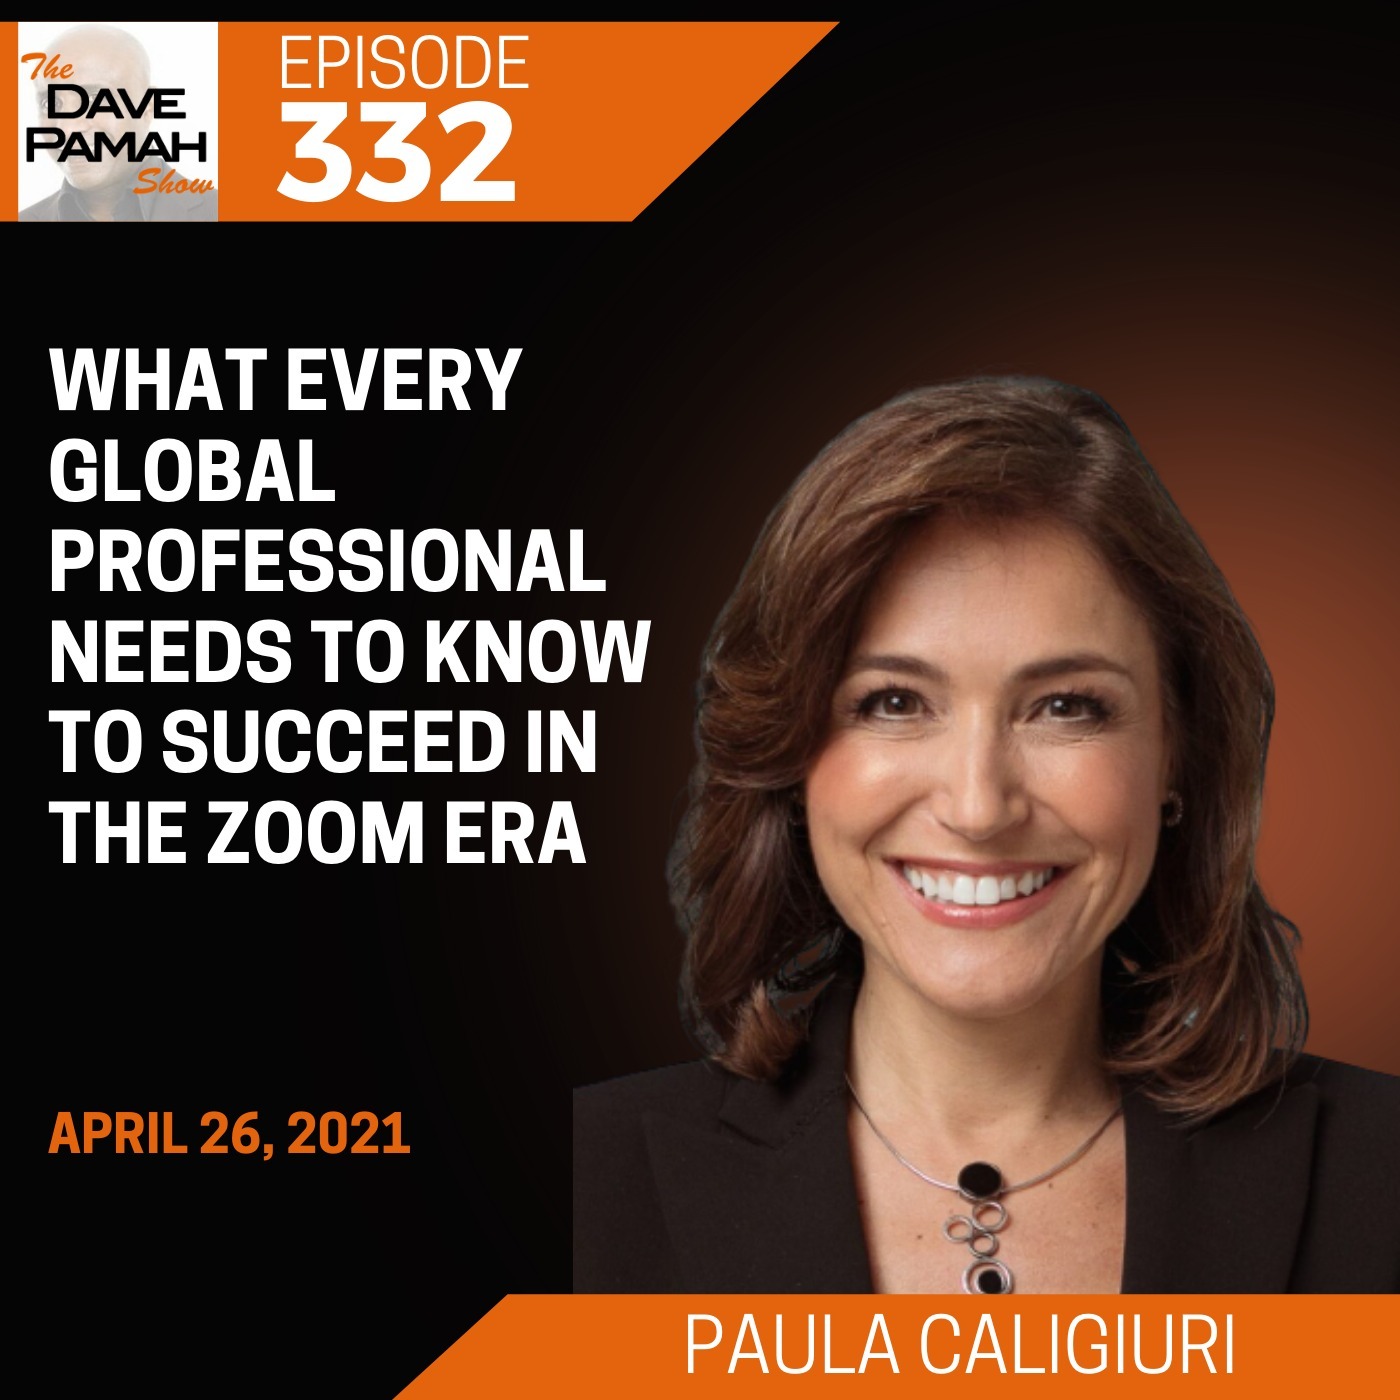 What Every Global Professional Needs to Know to Succeed in the Zoom Era with Paula Caligiuri